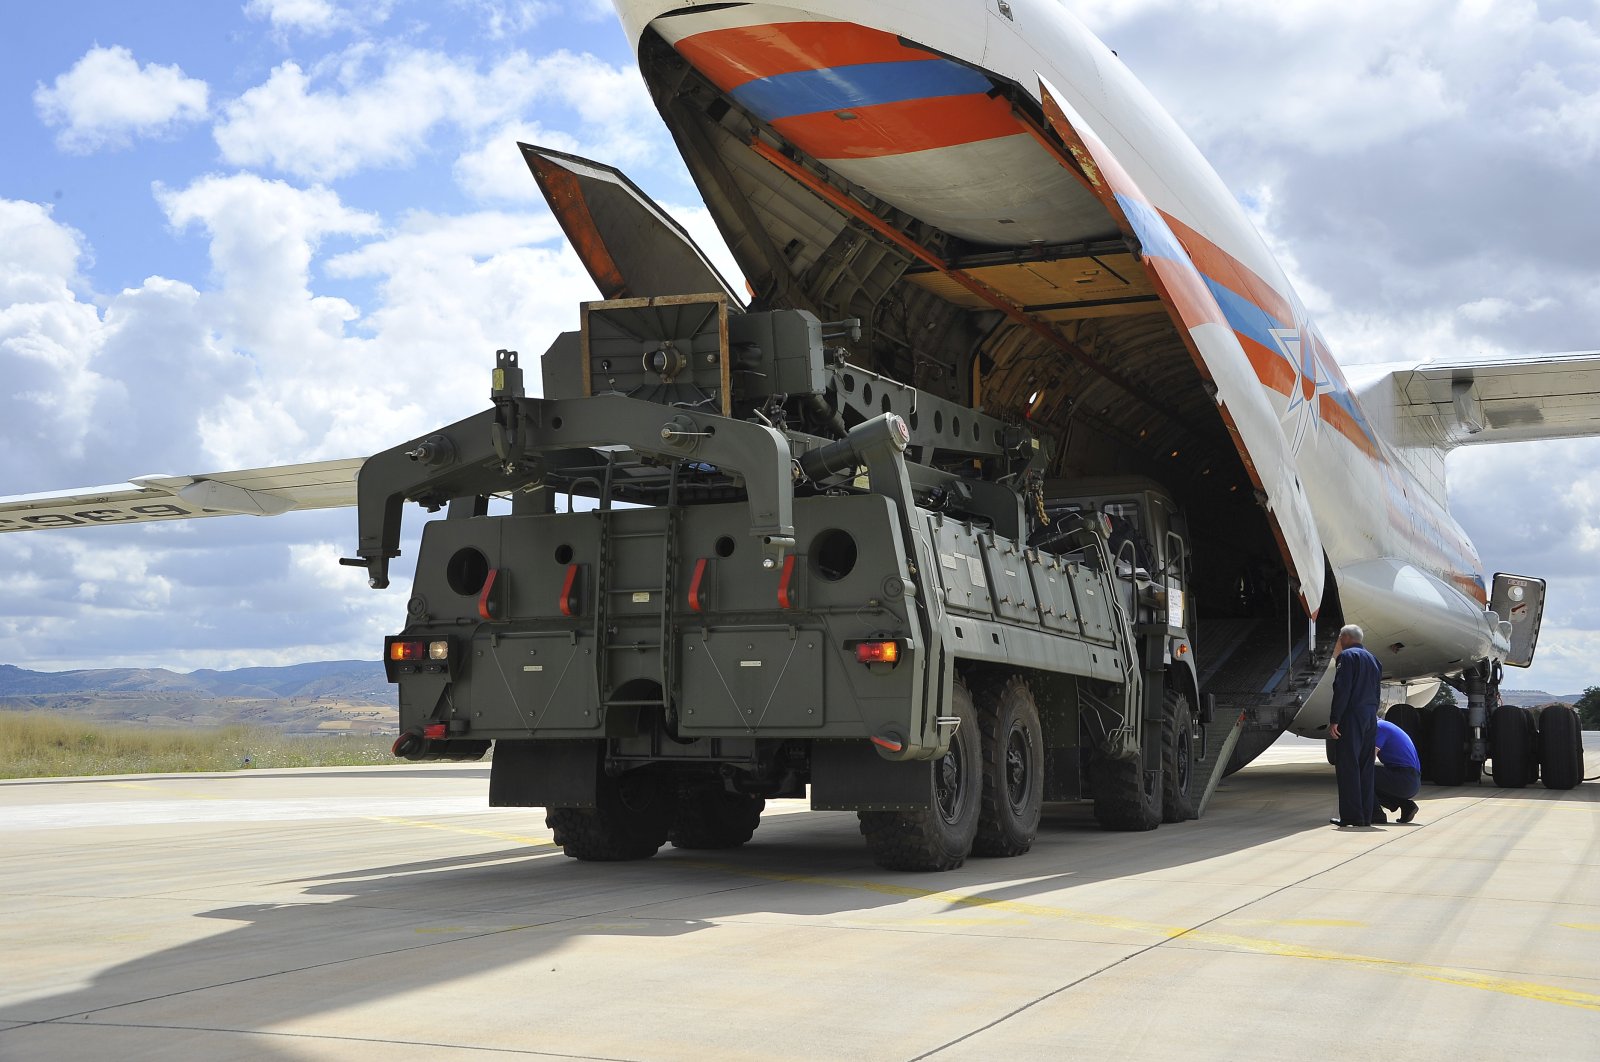 Military vehicles and equipment, parts of the S-400 air defense systems, are unloaded from a Russian transport aircraft, at Mürted military airport in Ankara, Türkiye, July 12, 2019. (AP Photo)